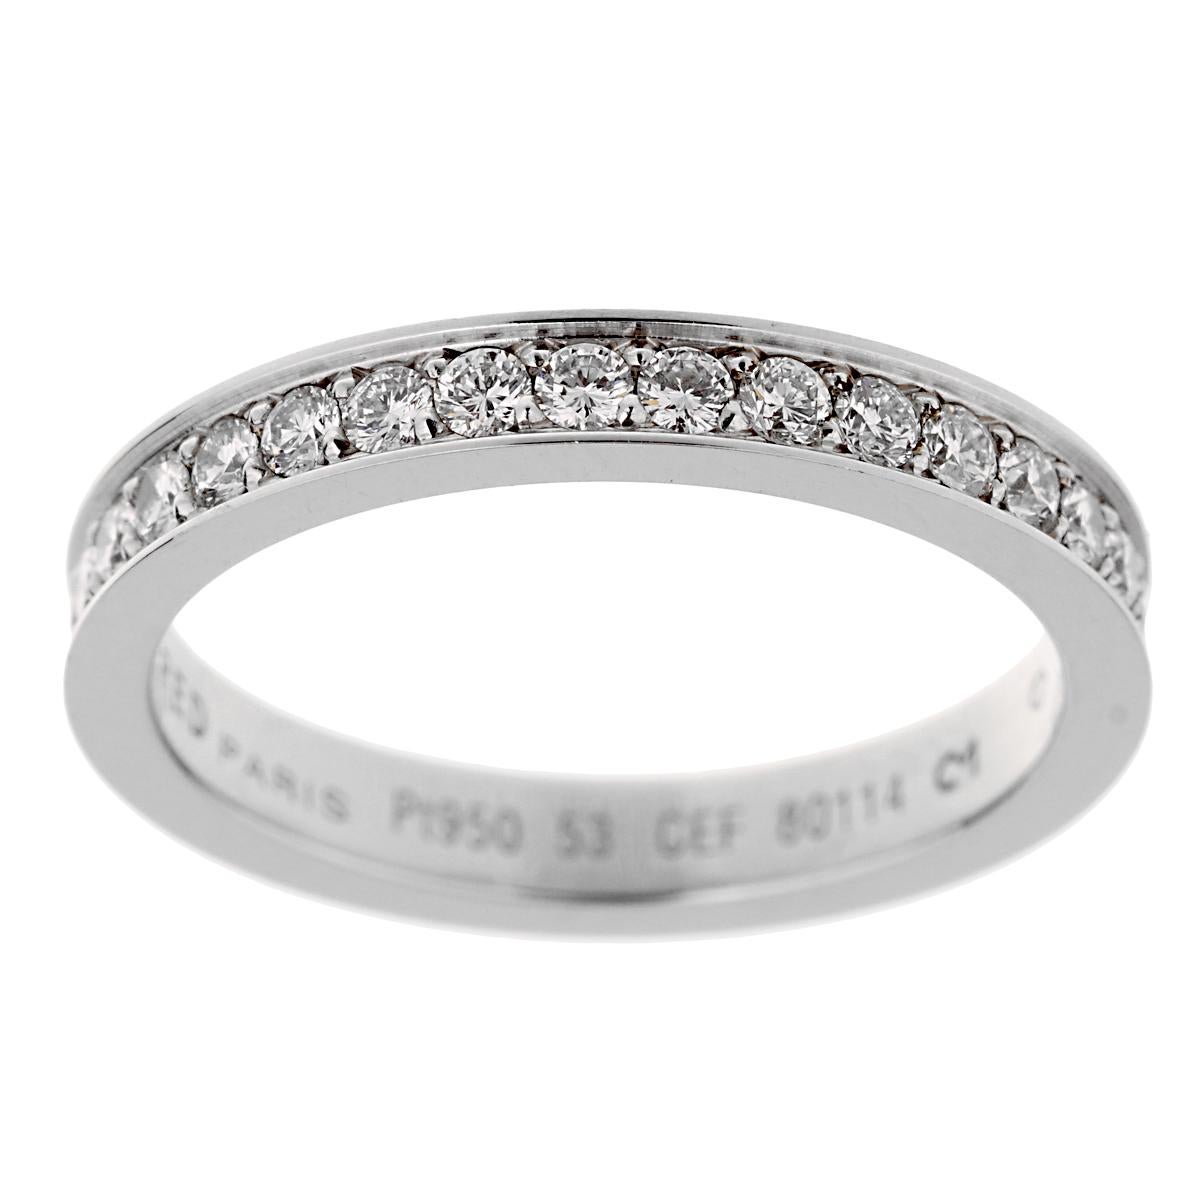 A classic Fred of Paris diamond eternity band, the ring is set with finest Fred of Paris round brilliant cut diamonds in ever lasting platinum. The ring measures a size 6 1/4.

Sku 2664